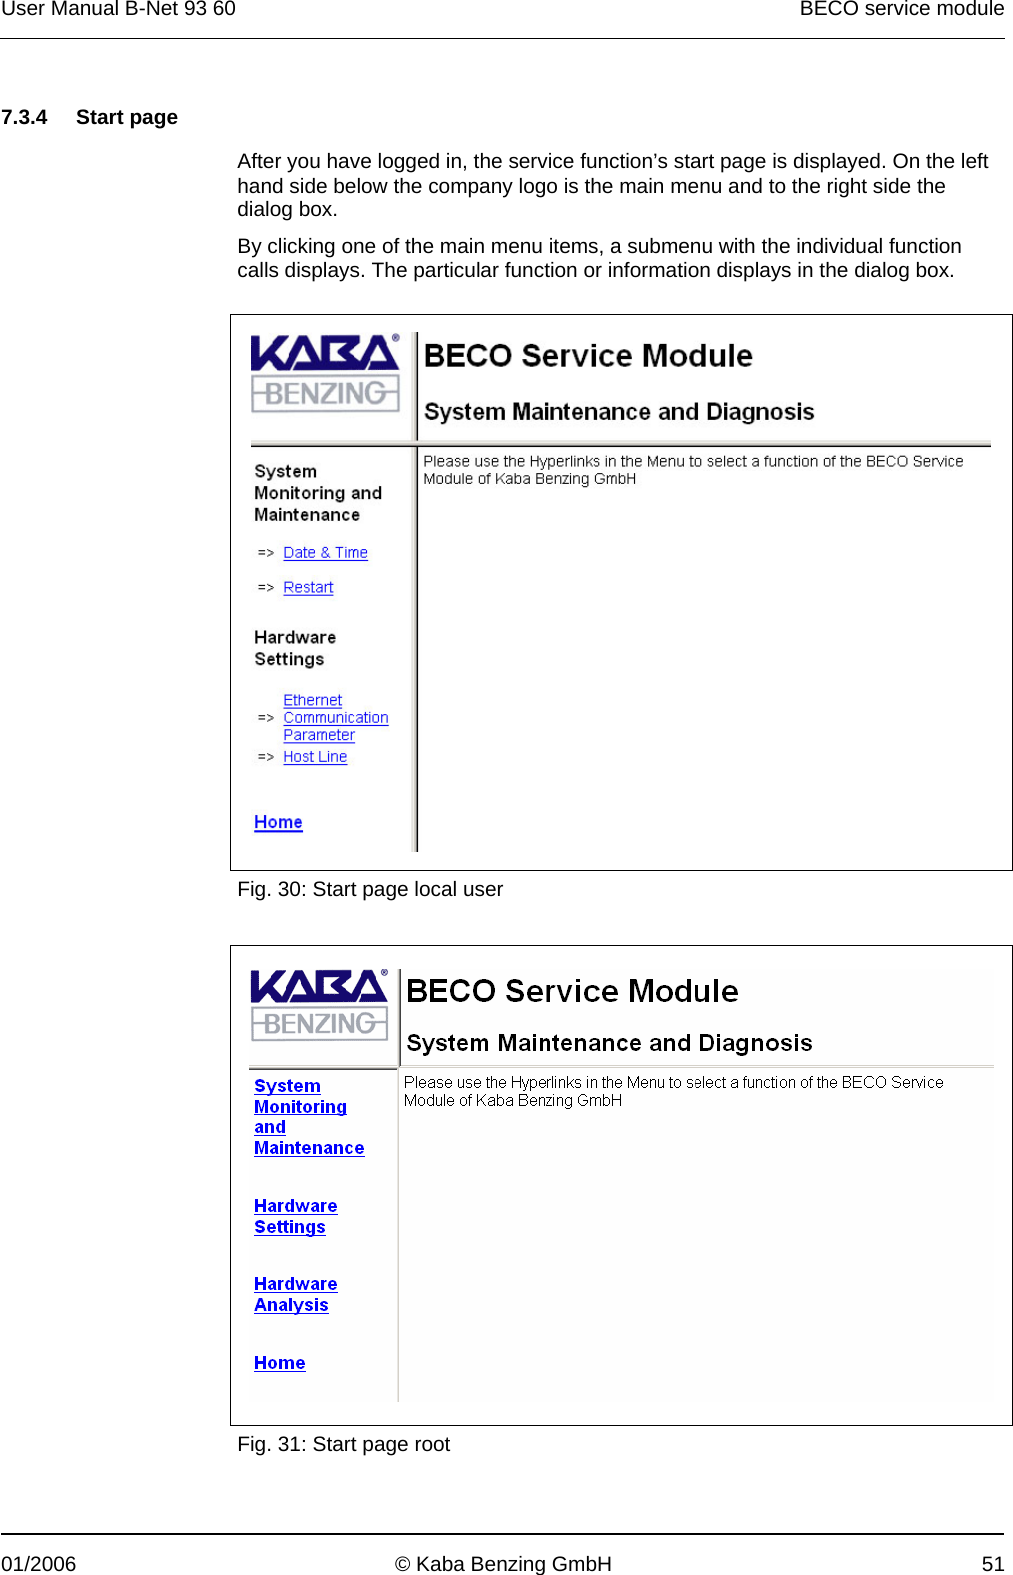 User Manual B-Net 93 60   BECO service module  01/2006  © Kaba Benzing GmbH  51   7.3.4 Start page  After you have logged in, the service function’s start page is displayed. On the left hand side below the company logo is the main menu and to the right side the dialog box. By clicking one of the main menu items, a submenu with the individual function calls displays. The particular function or information displays in the dialog box.    Fig. 30: Start page local user    Fig. 31: Start page root 